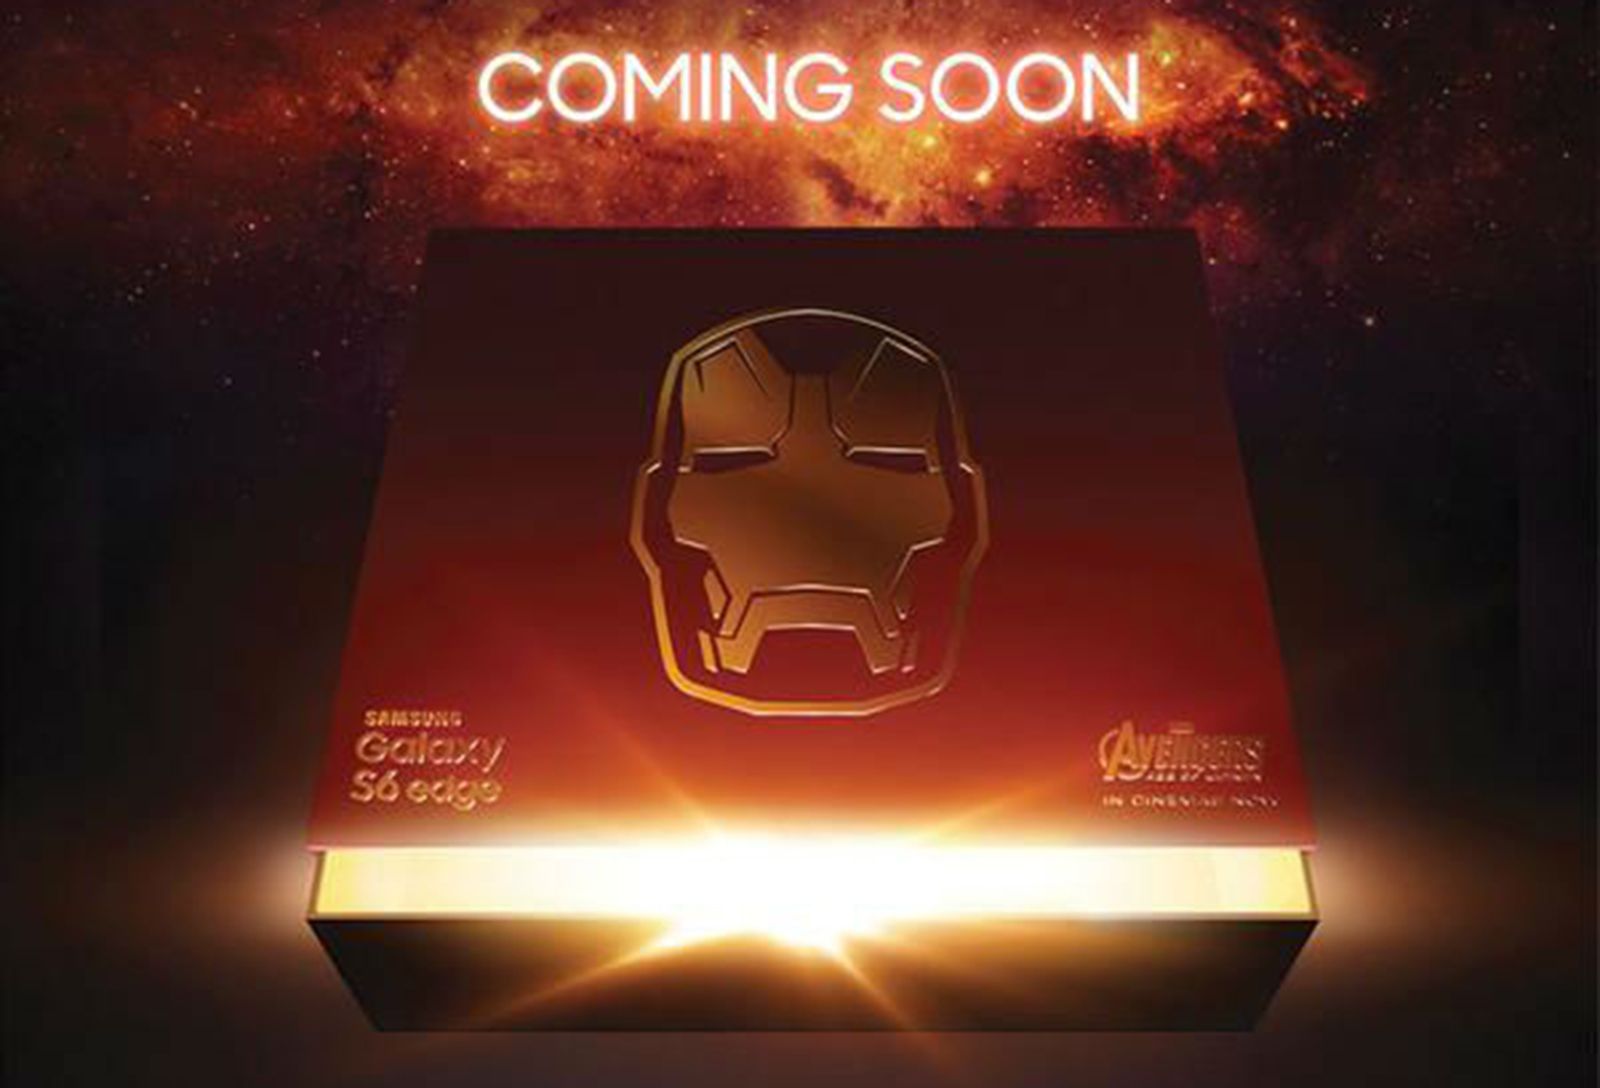 iron man samsung galaxy s6 edge officially teased for international release soon image 1